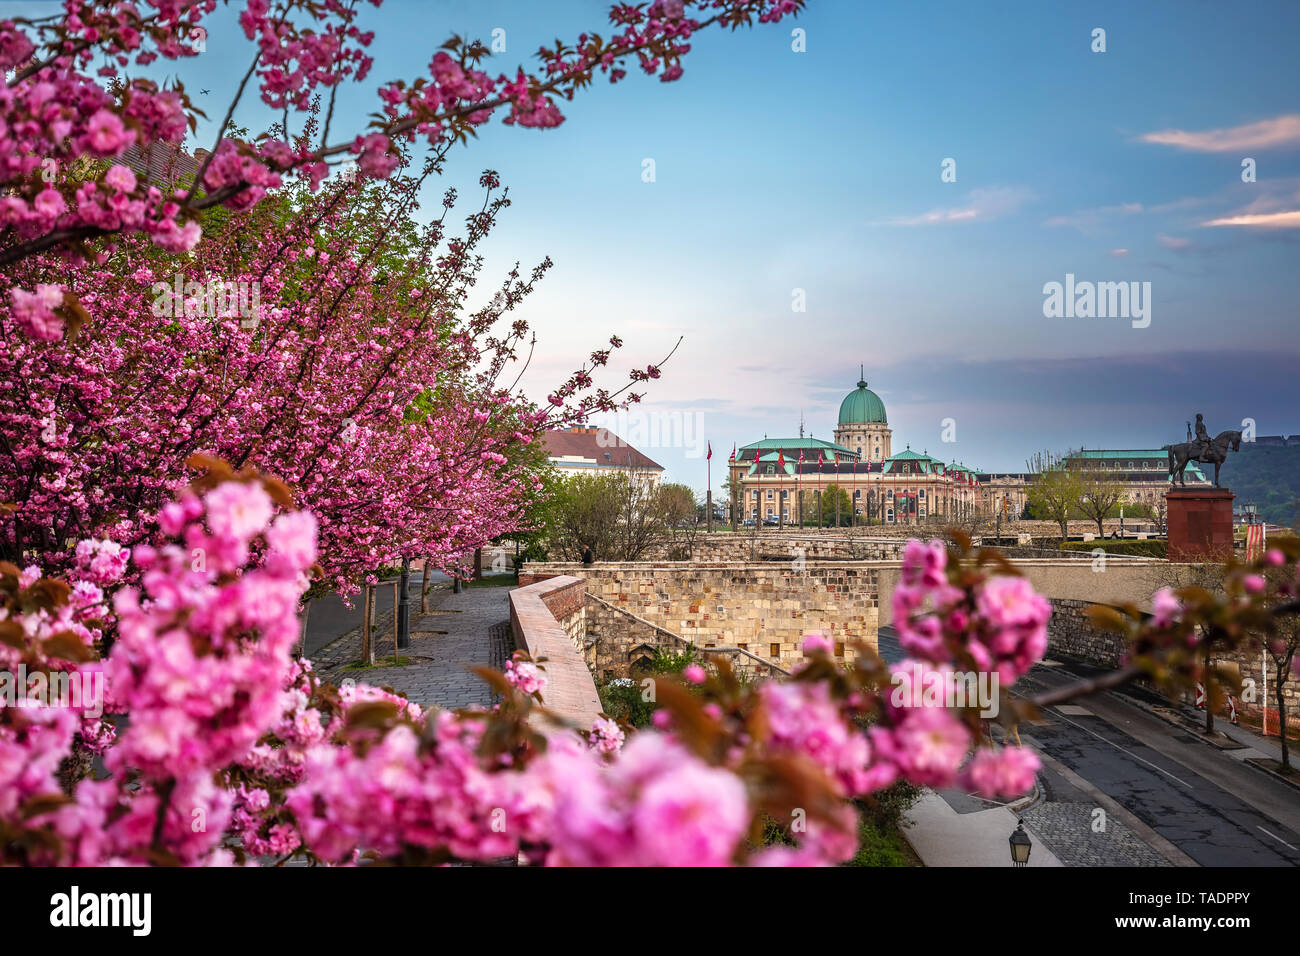 Budapest, Hungary - The famous Buda Castle Royal Palace on a Spring afternoon with blooming cherry blossom at foreground Stock Photo